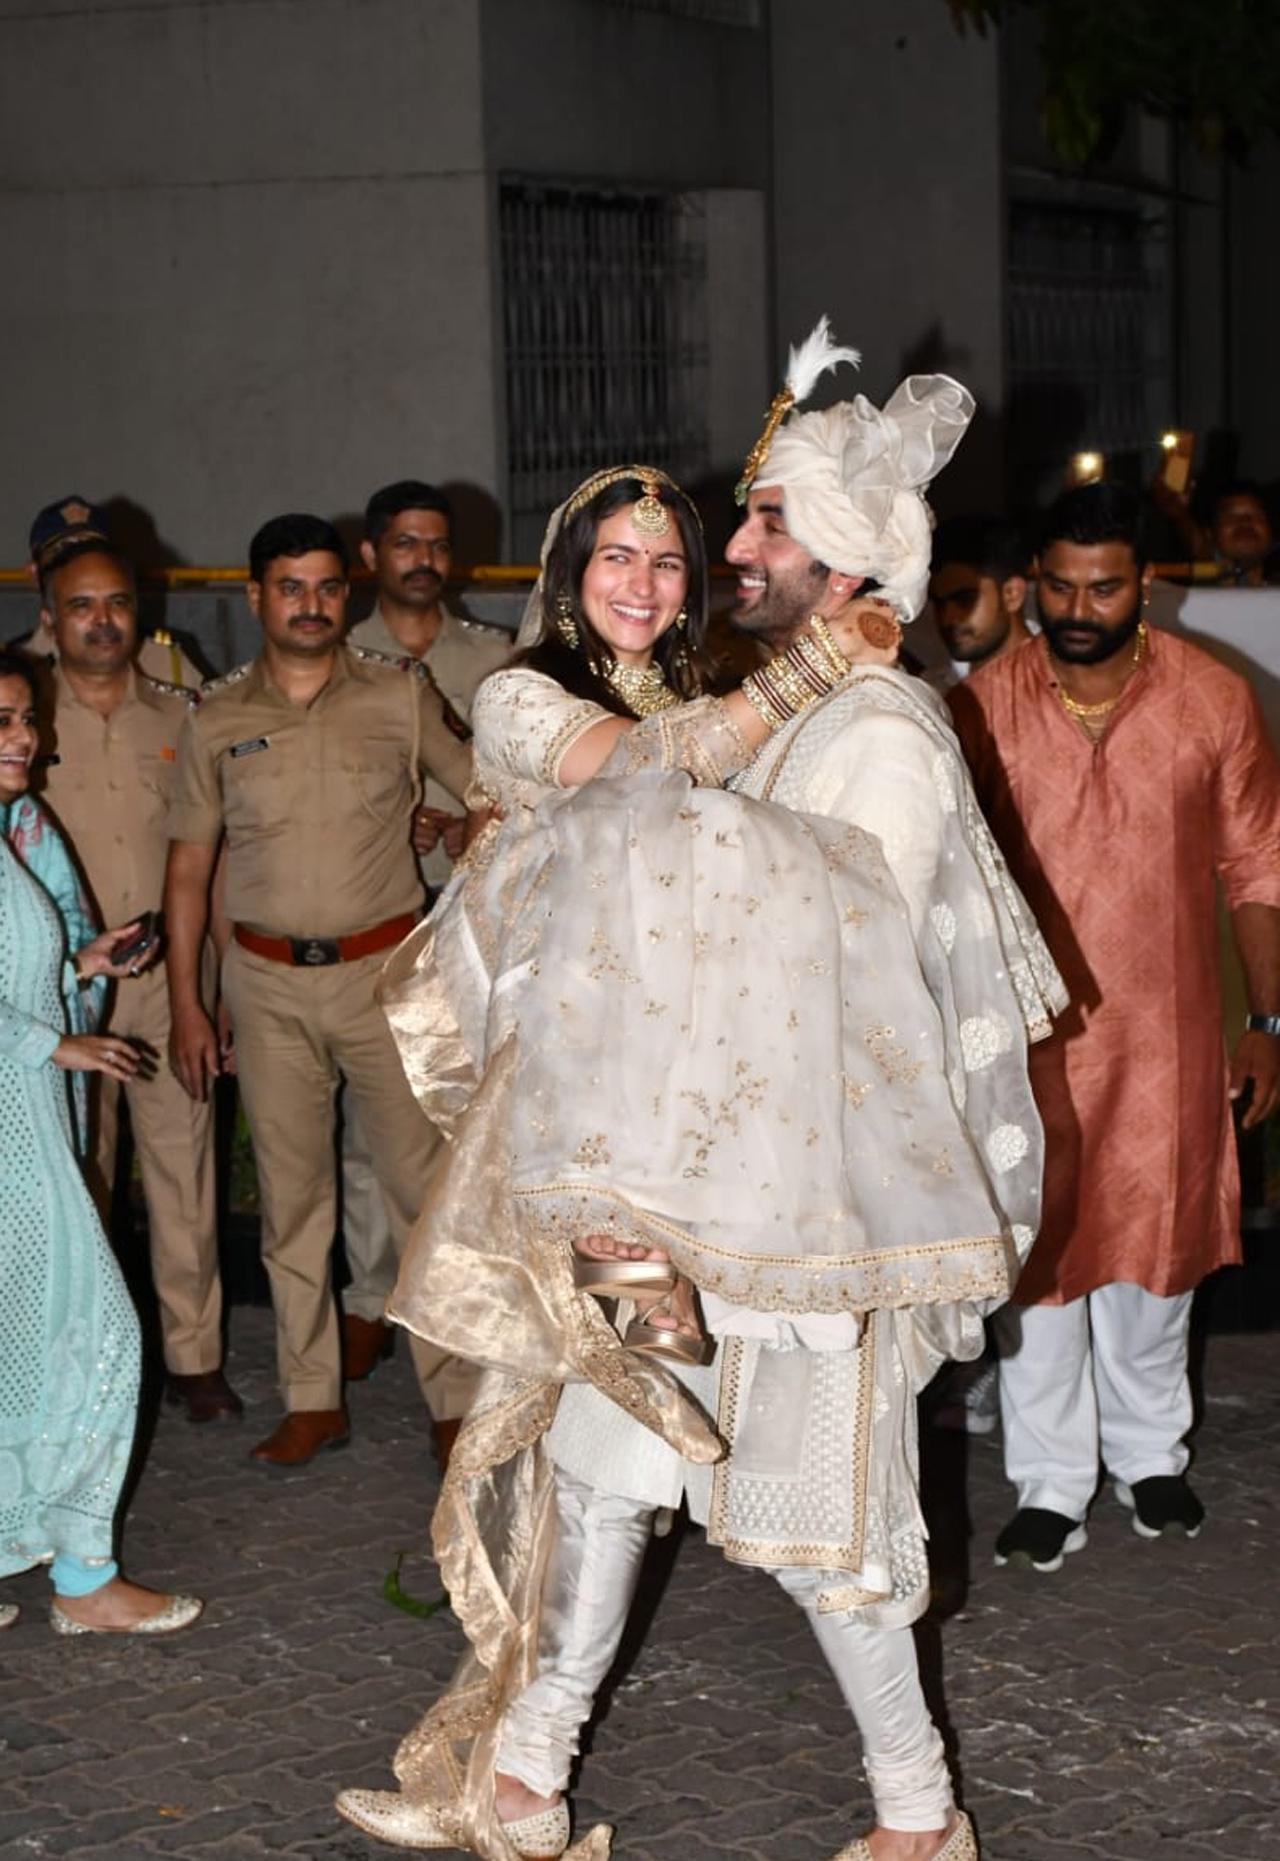 The moment the wedding pictures of Ranbir Kapoor and Alia Bhatt dropped on social media, celebrities wished the couple one after another with heartfelt messages. Neha Dhupia, Akanksha Ranjan Kapoor and many others wished the couple with lots of hearts and smiles.